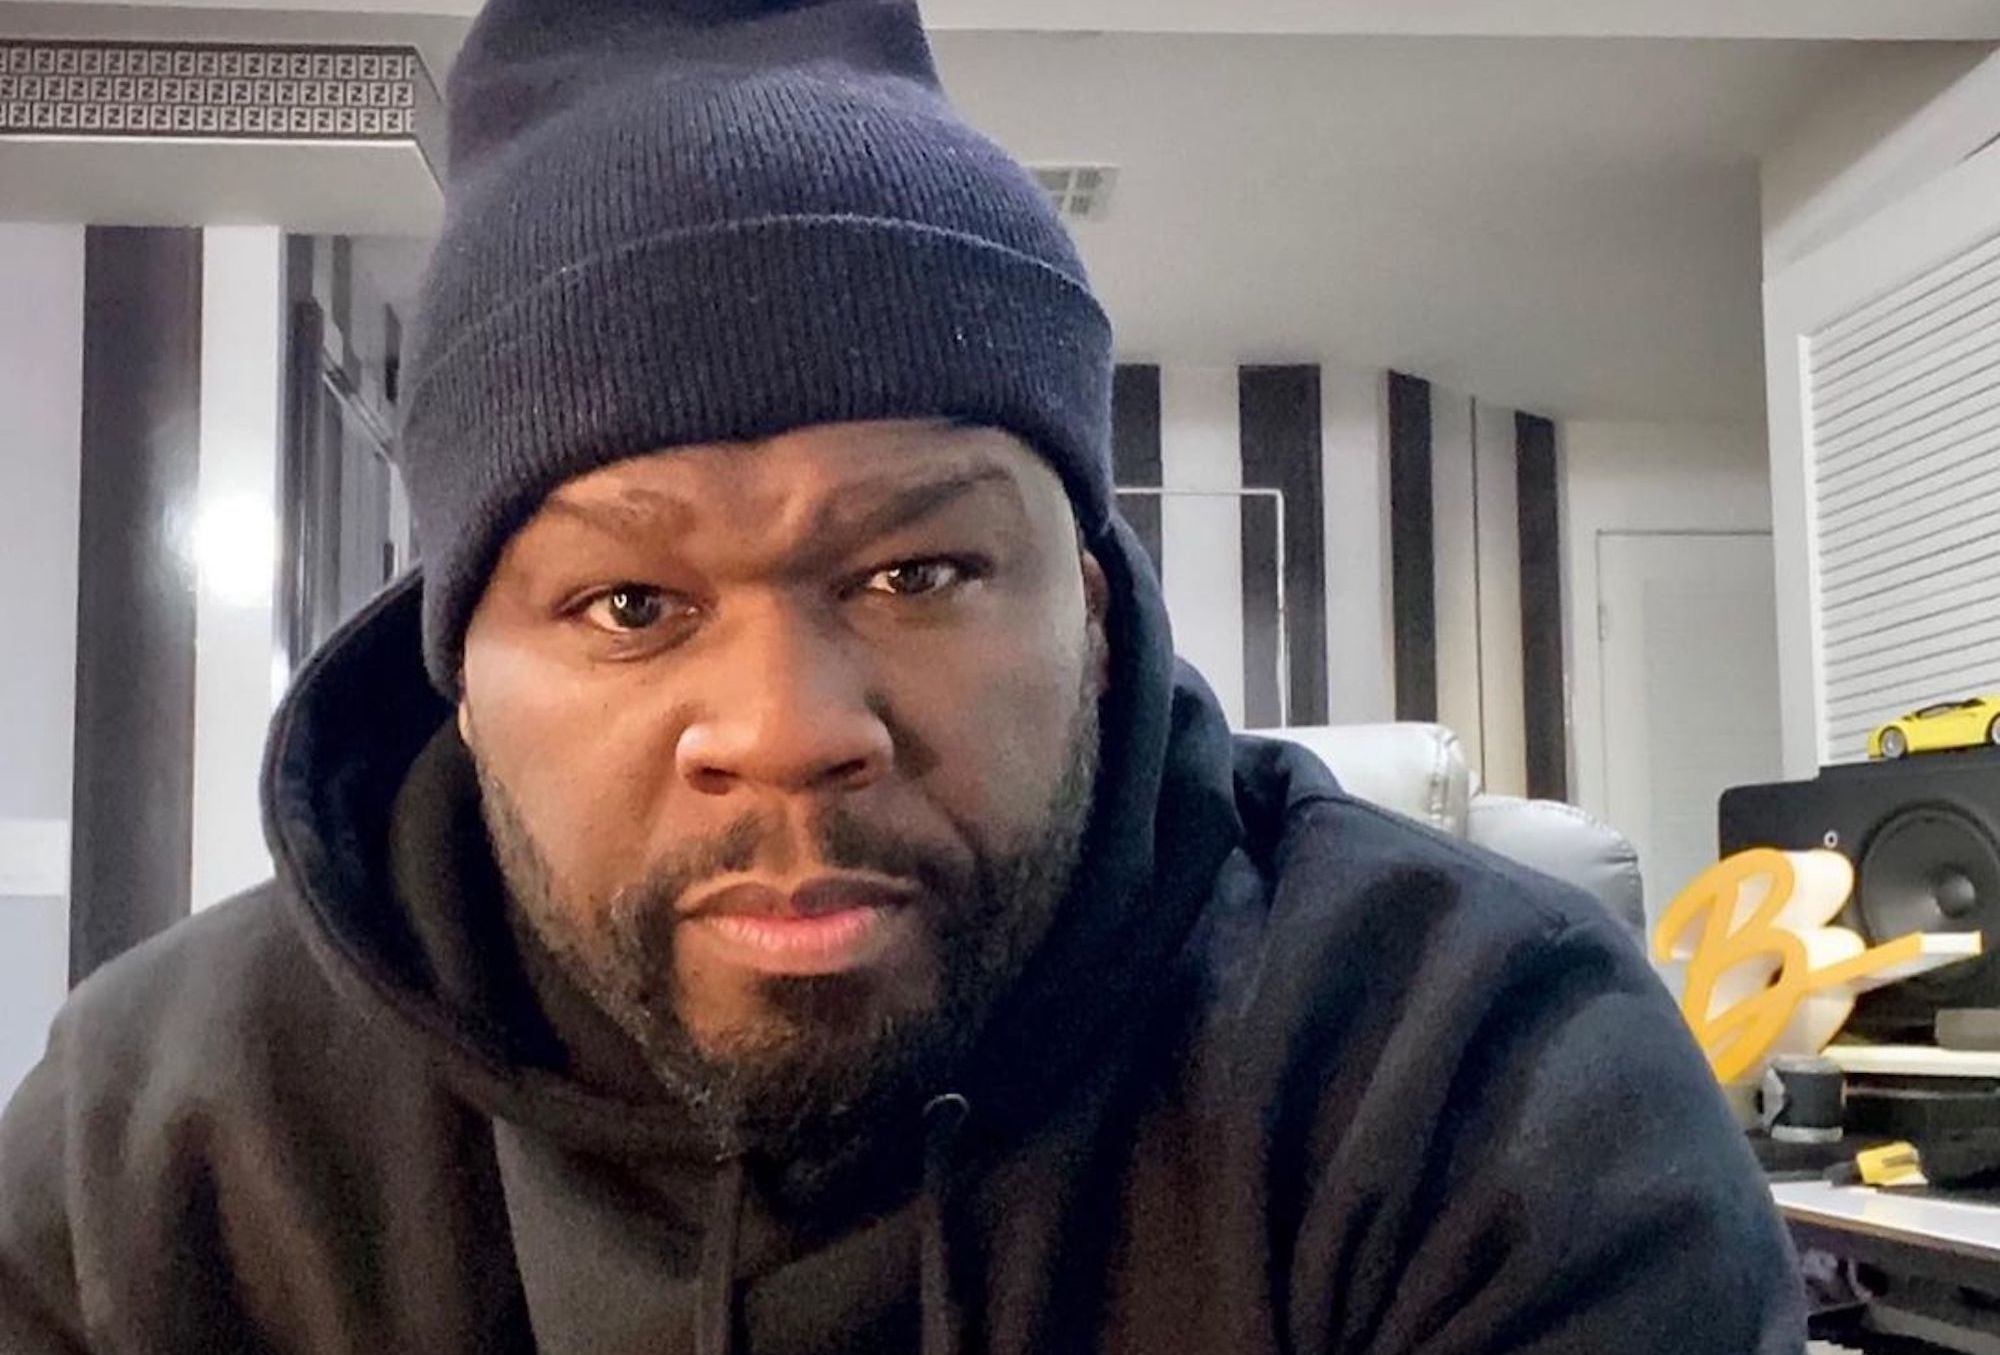 50 cent part of the game Cent starz tvinsider unveils ISBAGUS